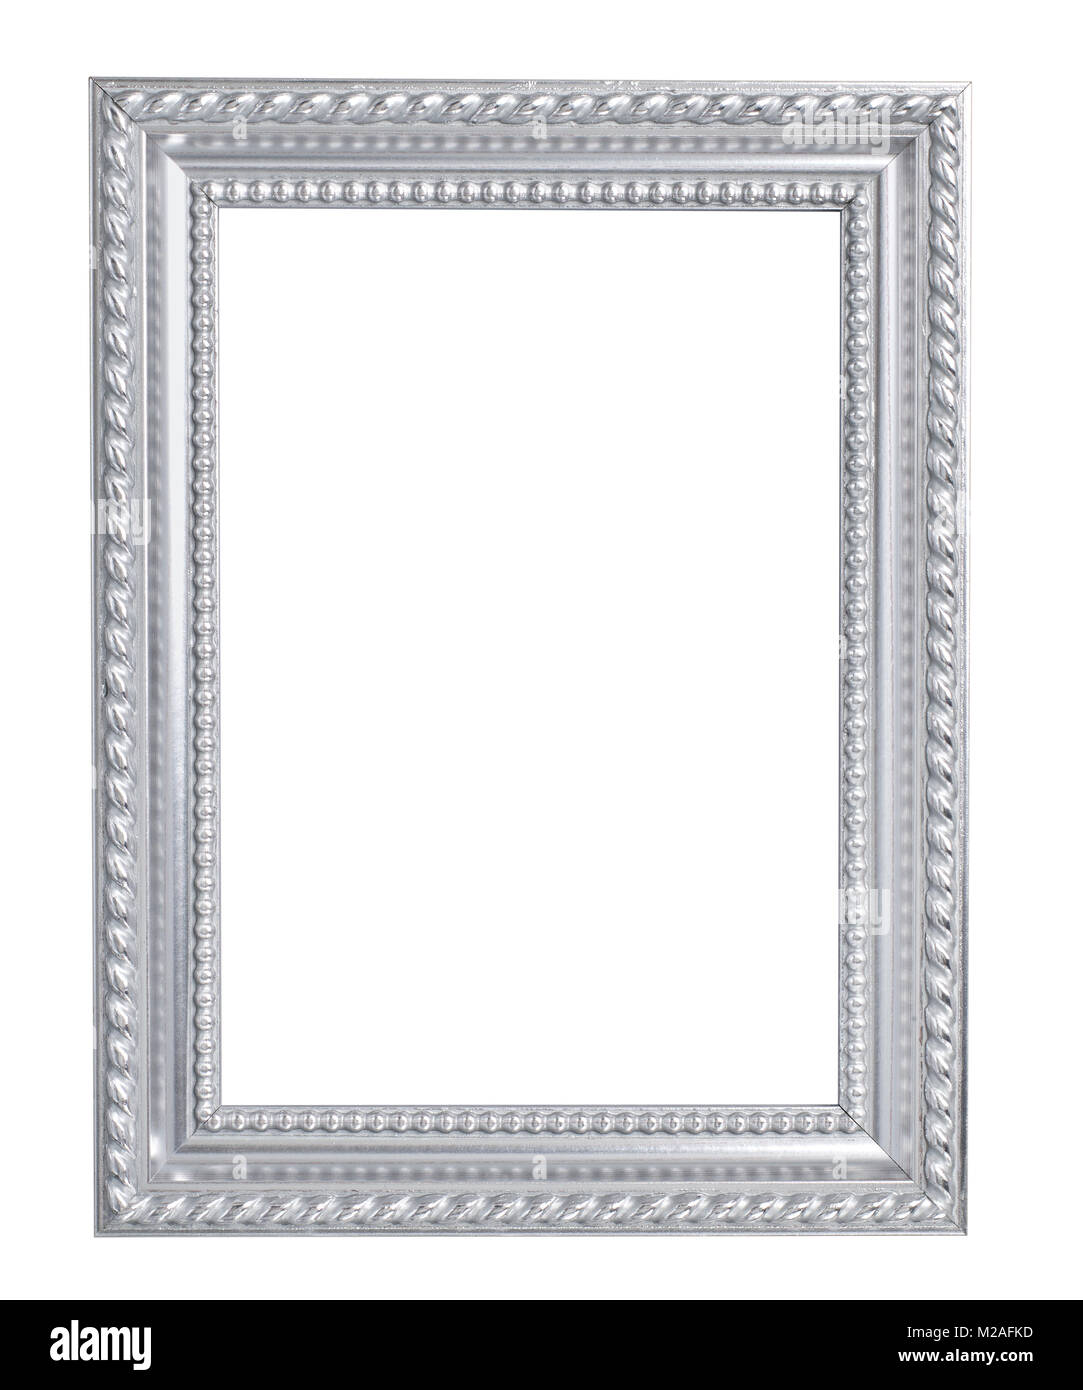 silver picture frame Stock Photo